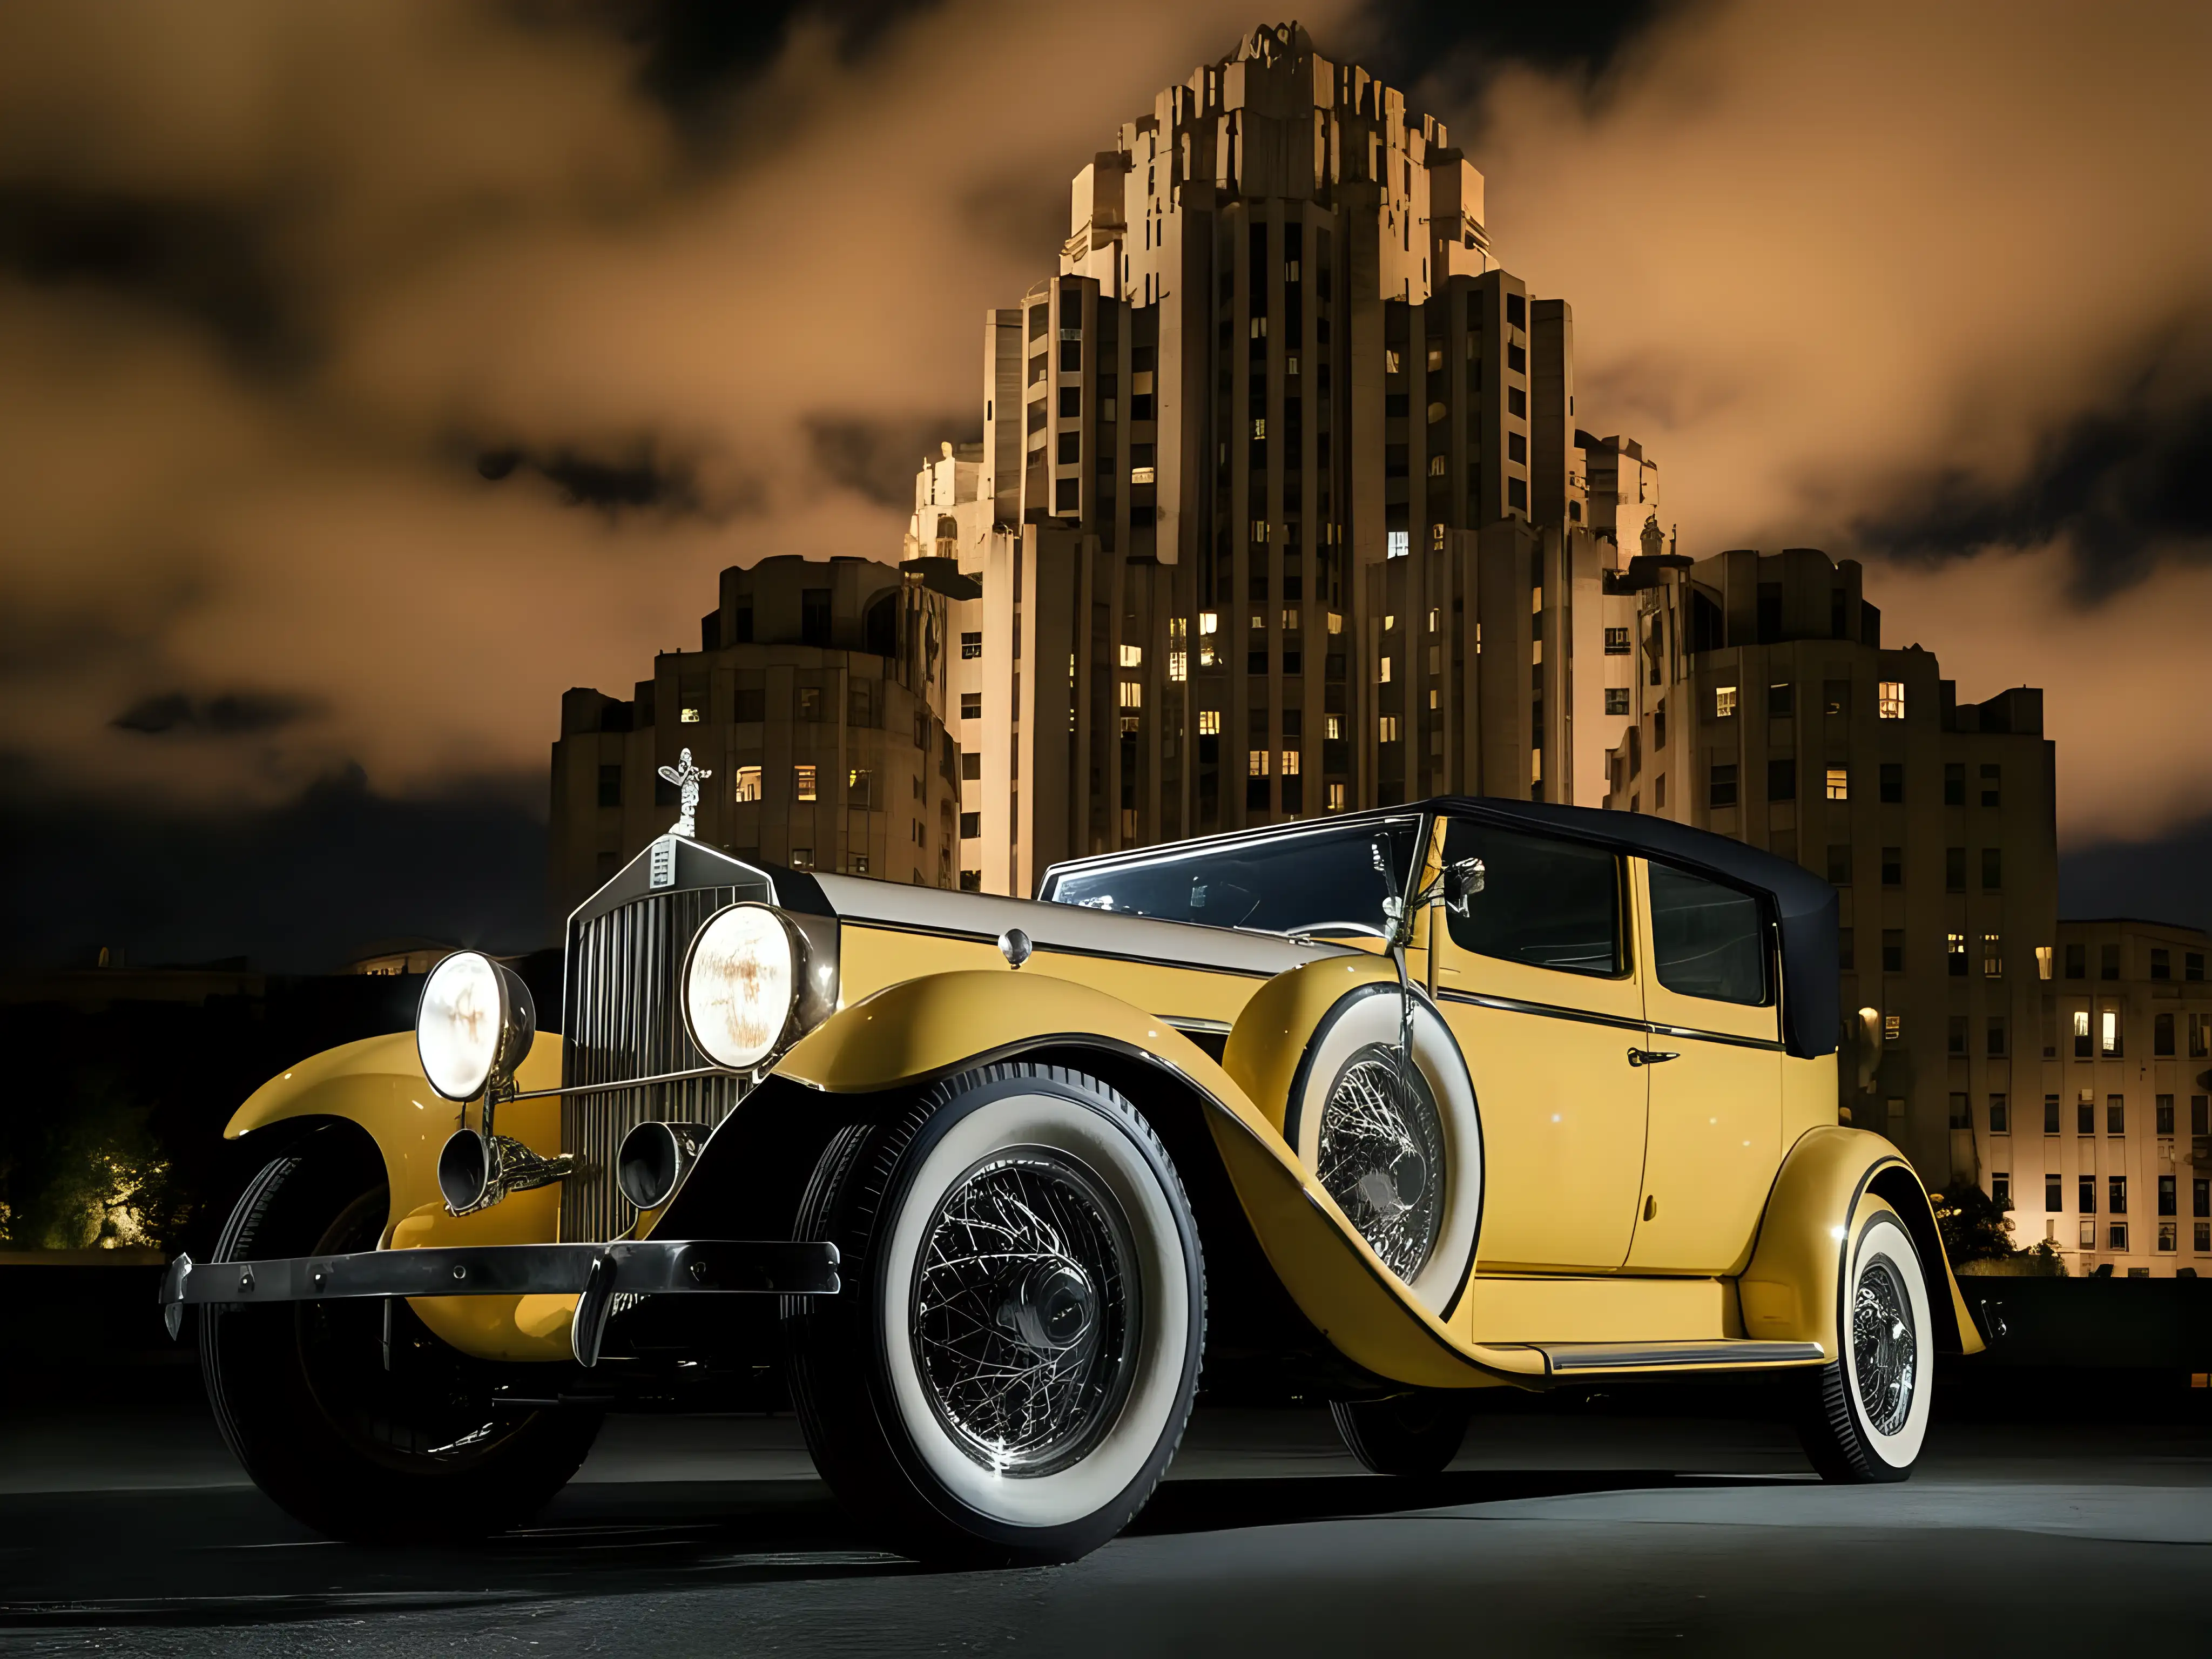 Vintage Yellow Rolls Royce Parked in Front of Art Deco Building at Night